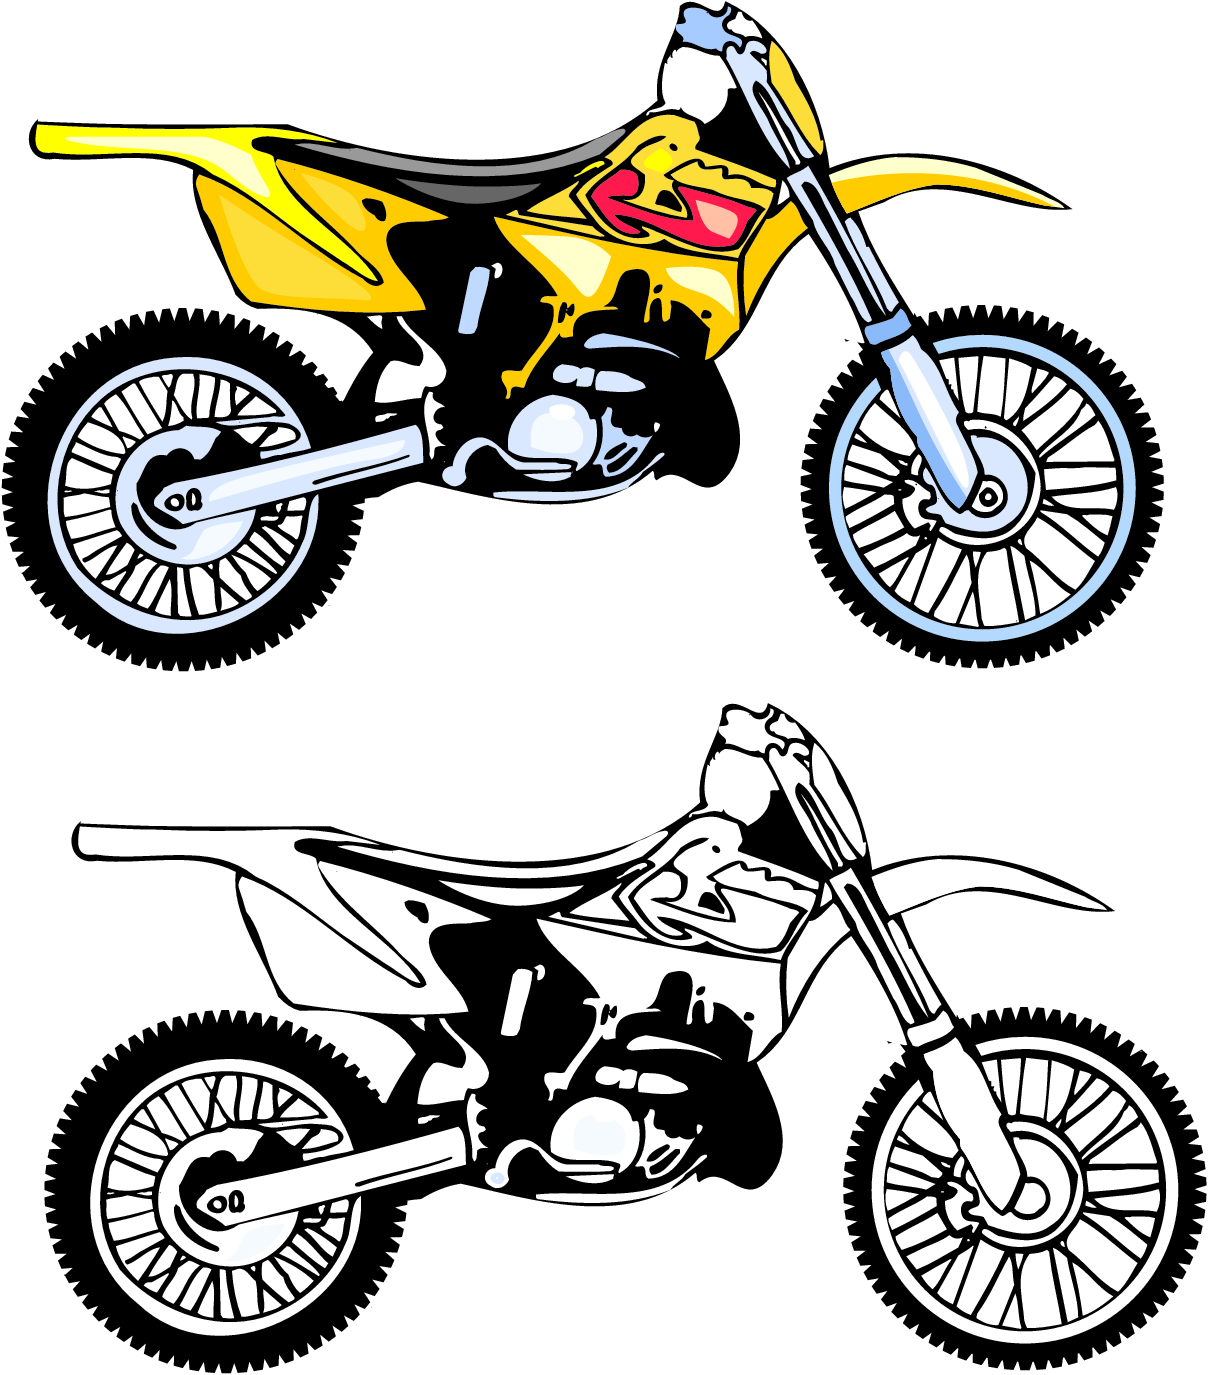 Motorcycle Clip Art Free - ClipArt Best